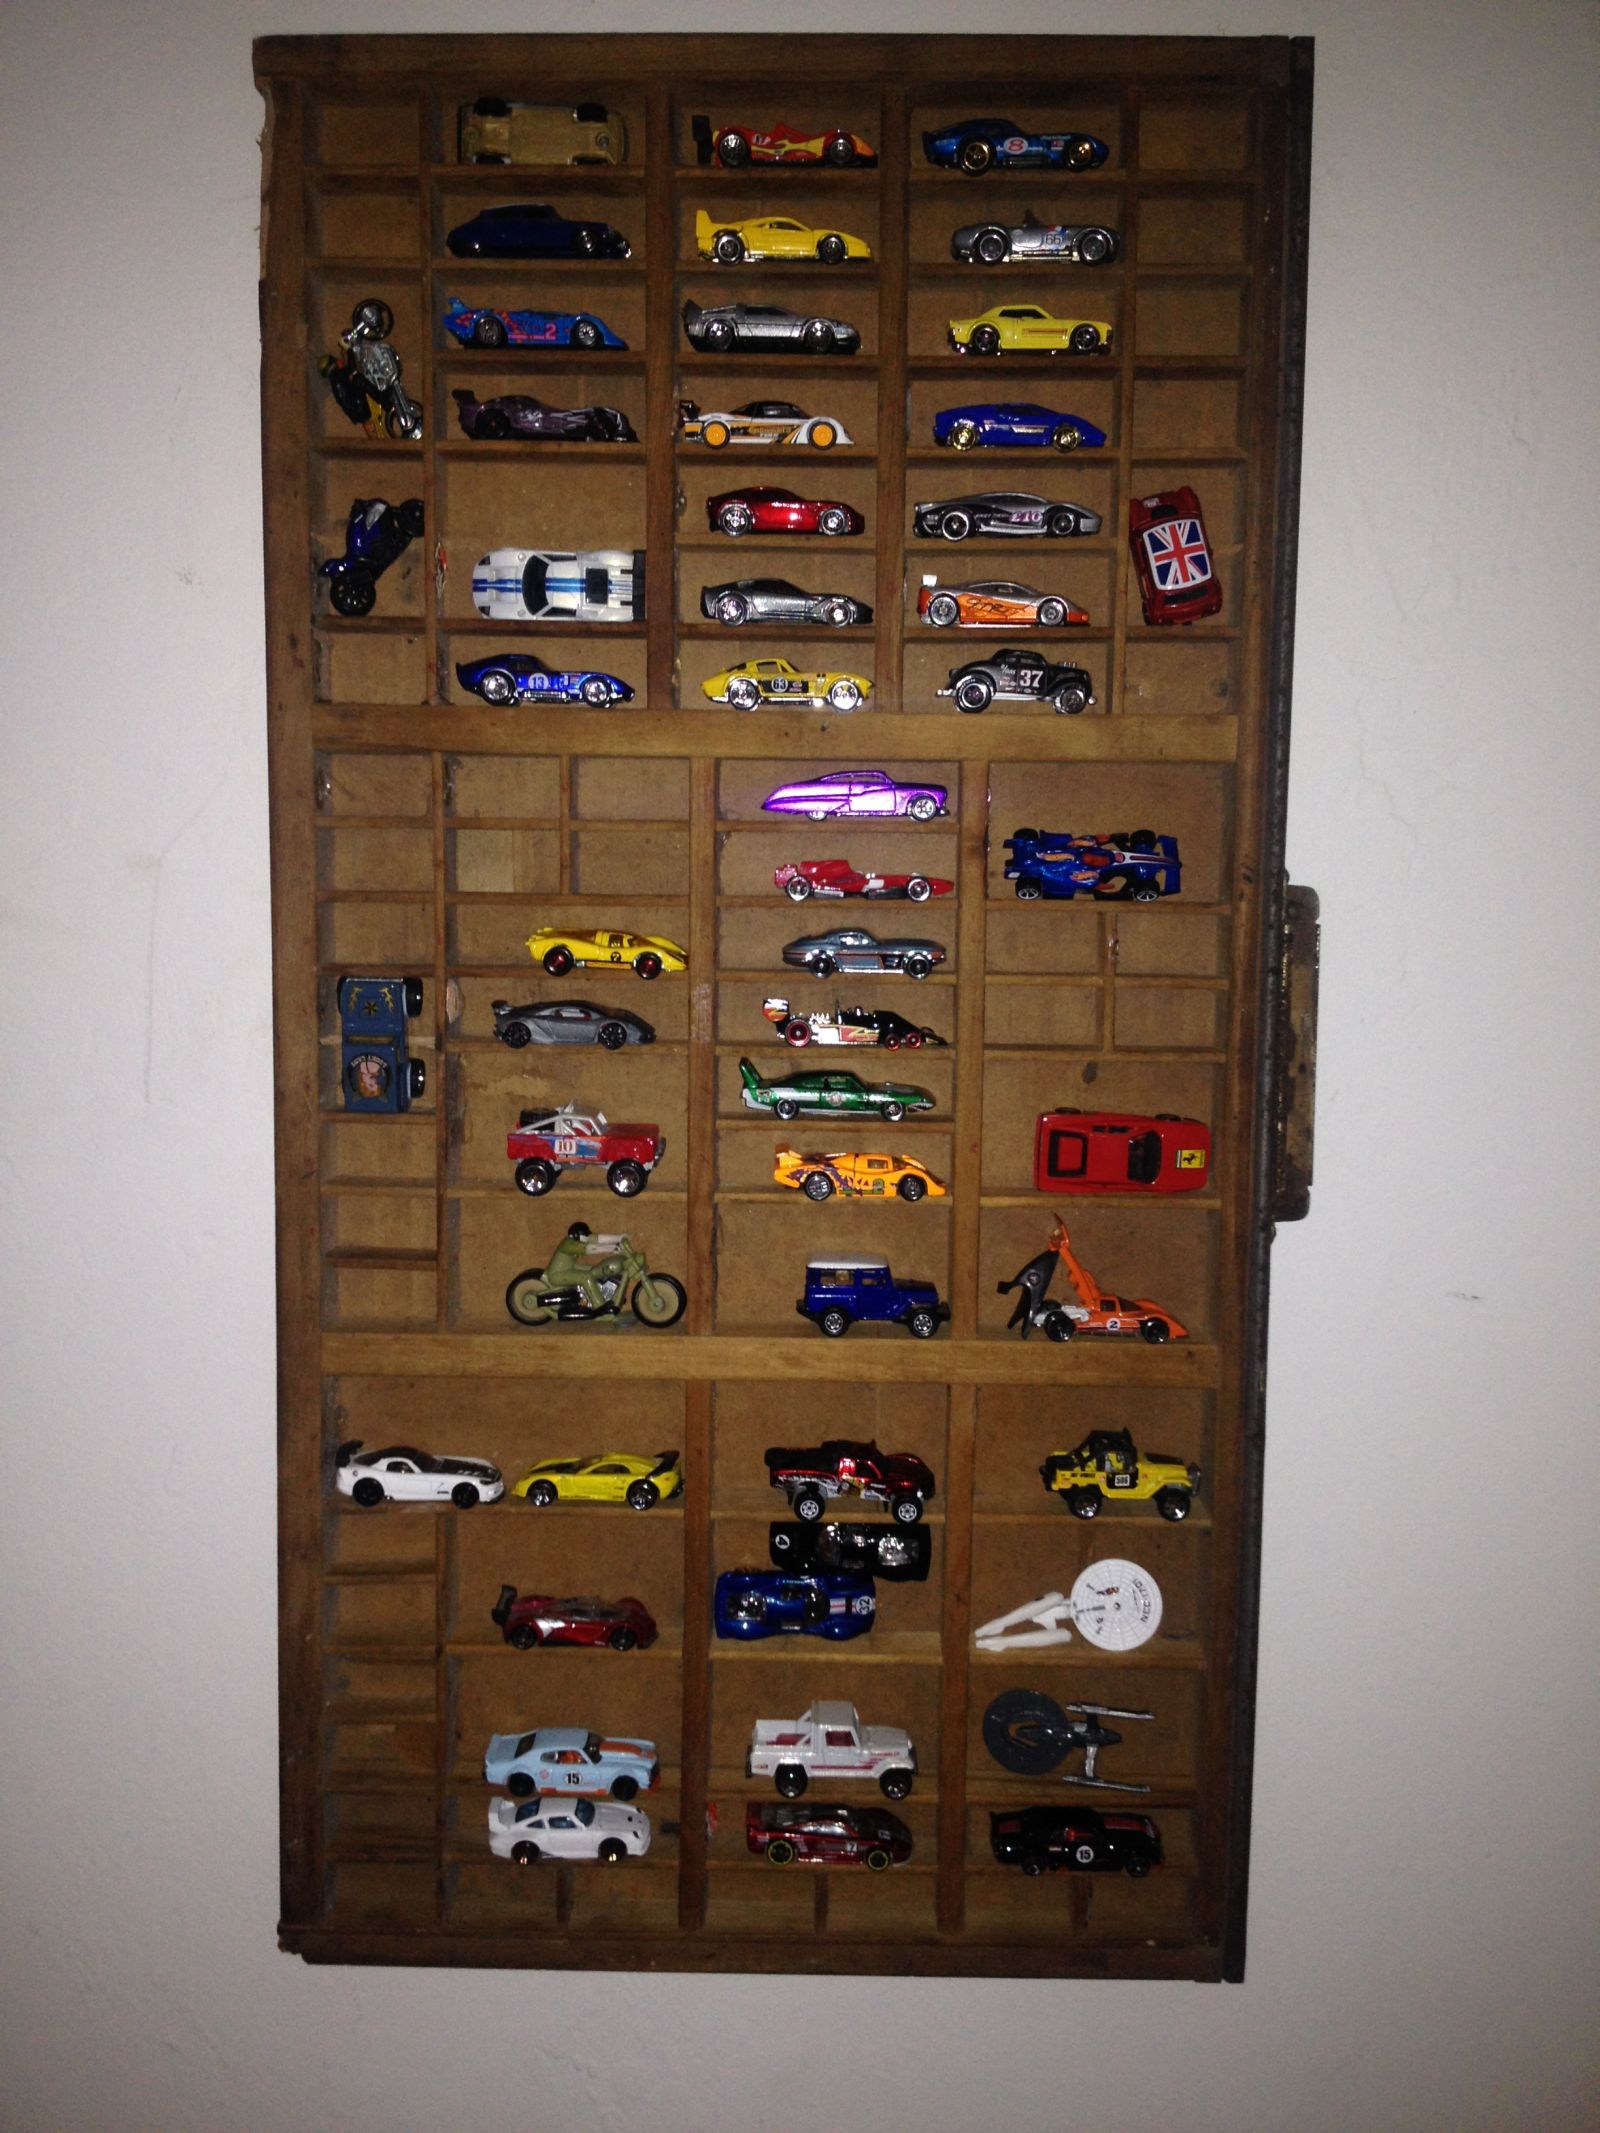 Illustration for article titled New Hot Wheels Display, Latest Haul and Trade Cars